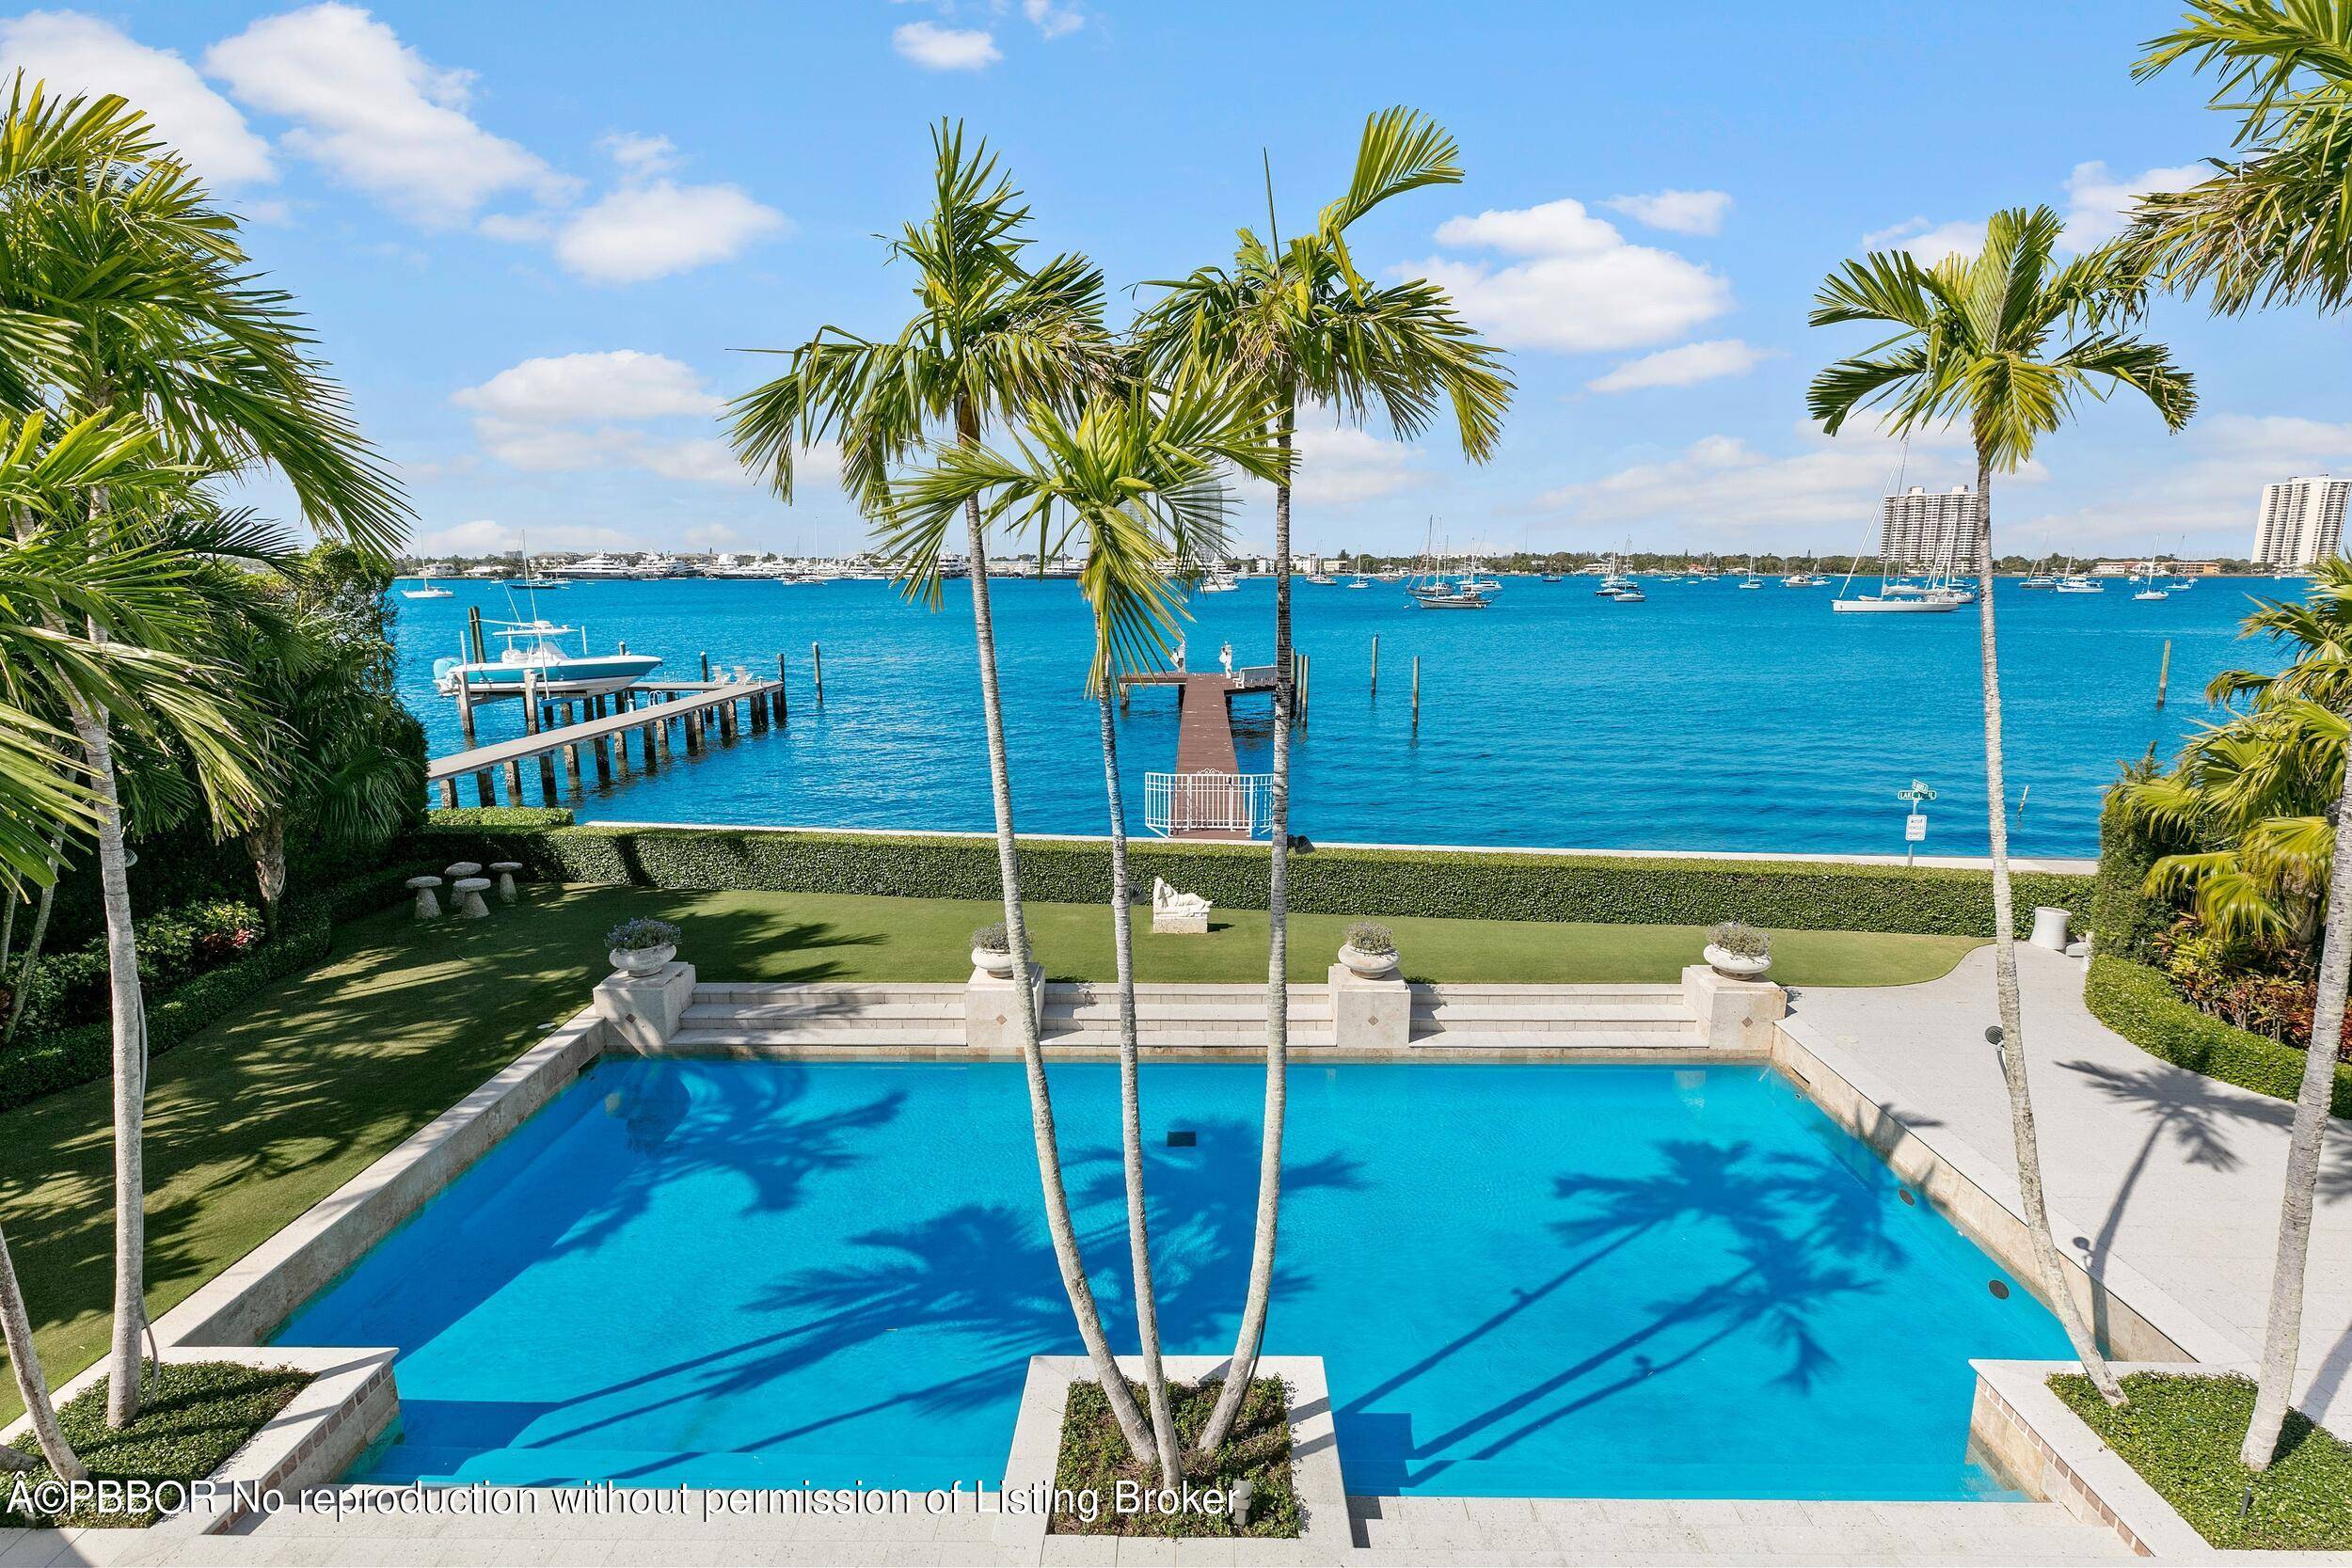 Stunning, contemporary regency with dramatic views of the Intracoastal Waterway and the motor yachts at Rybovich Marina.